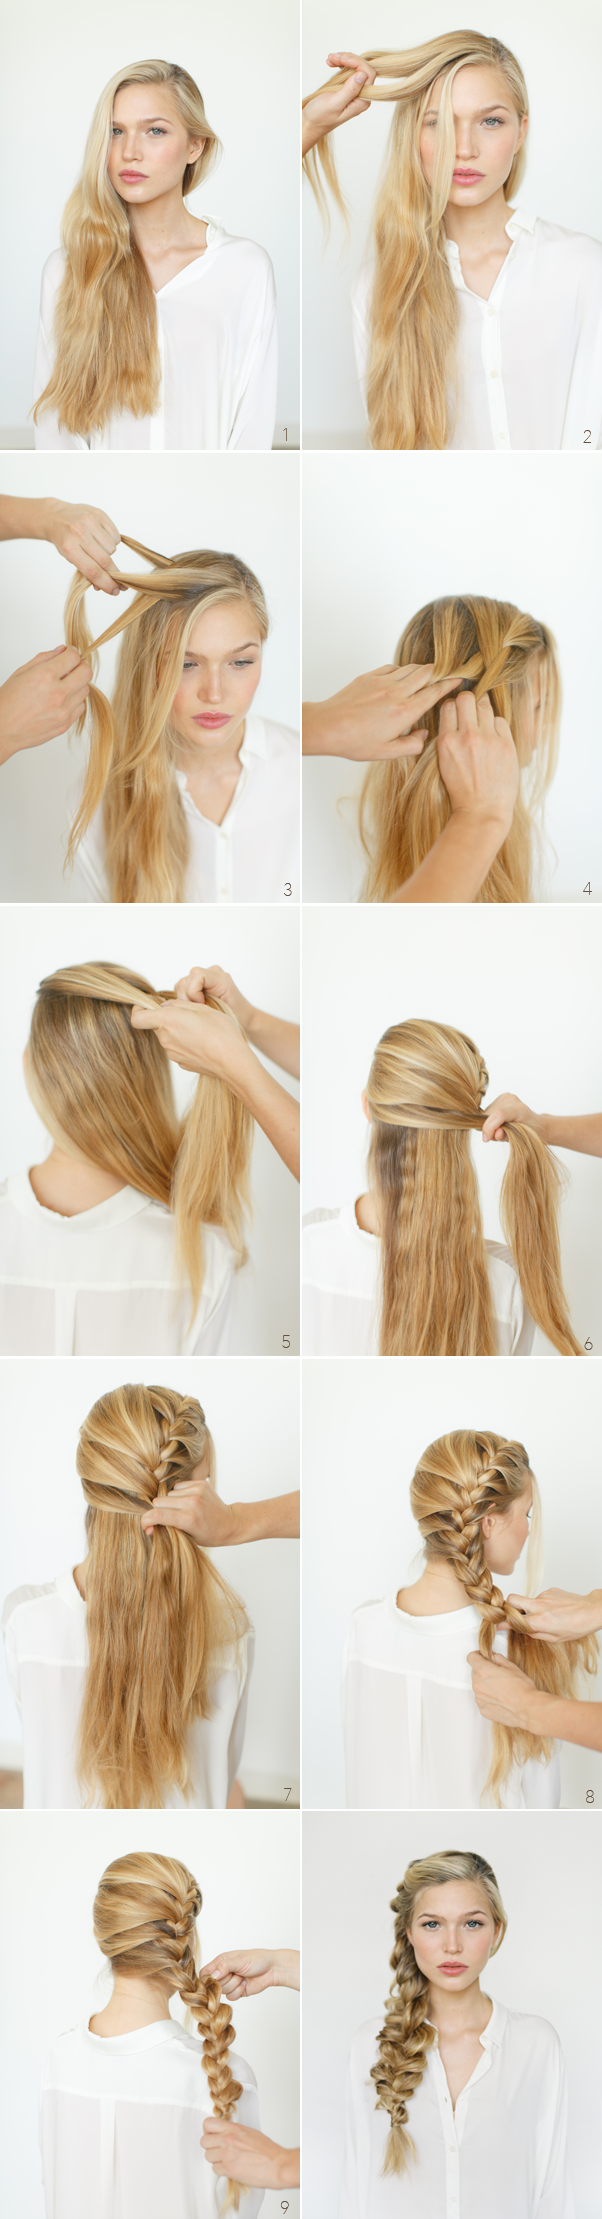 17 Romantic Hairstyle Ideas and Tutorials